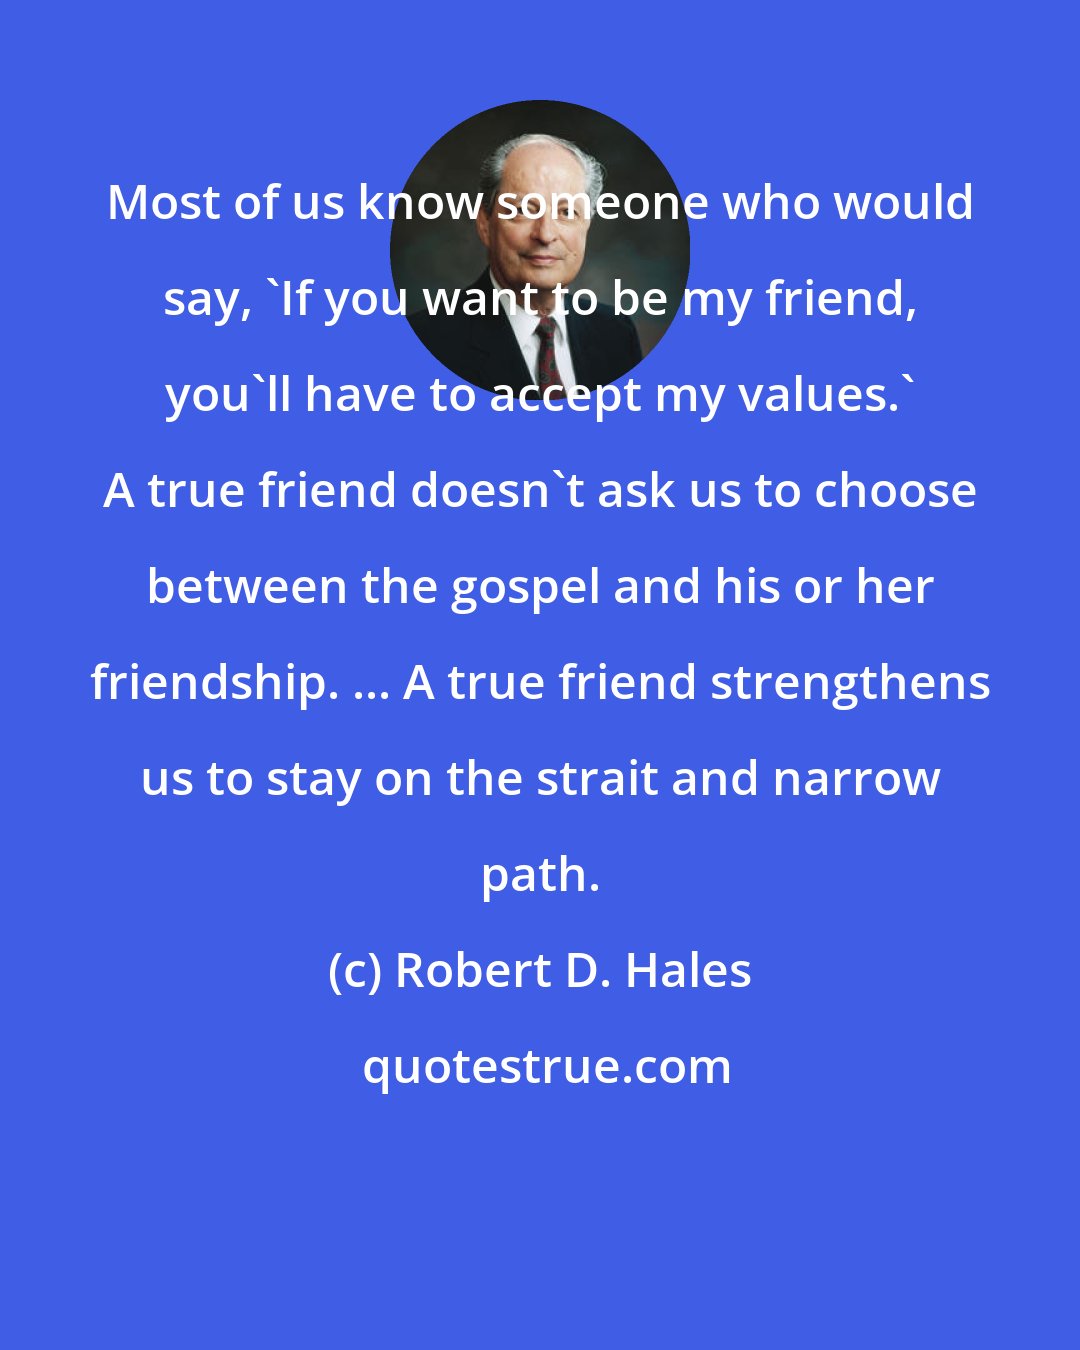 Robert D. Hales: Most of us know someone who would say, 'If you want to be my friend, you'll have to accept my values.' A true friend doesn't ask us to choose between the gospel and his or her friendship. ... A true friend strengthens us to stay on the strait and narrow path.